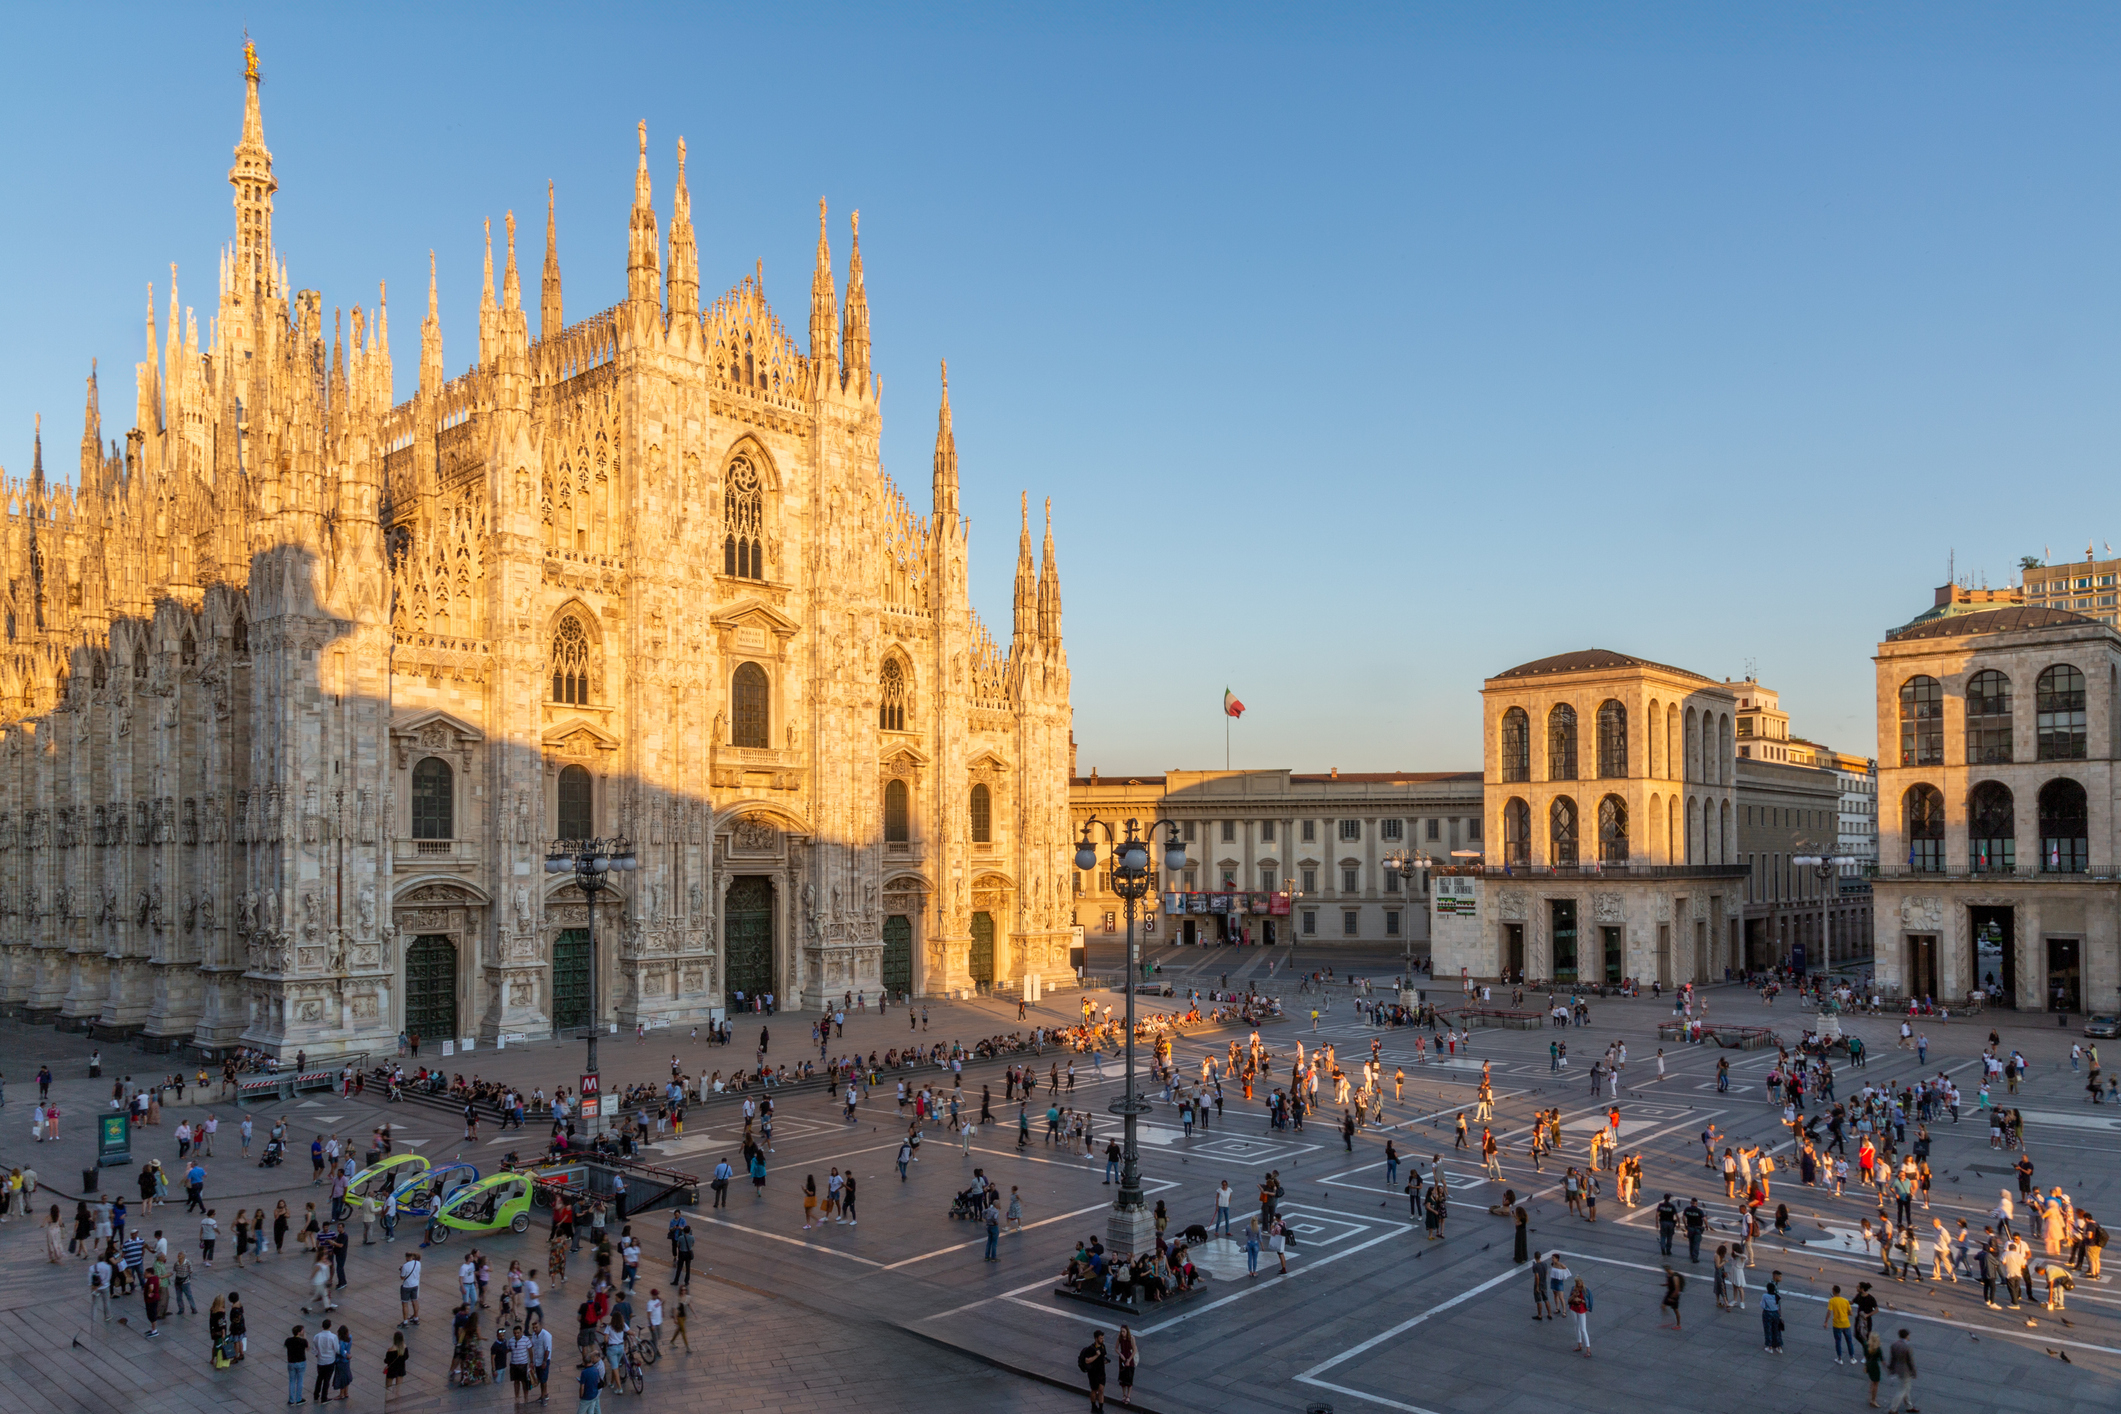 Milan Cathedral with tourists in the foreground at Piazza del Duomo